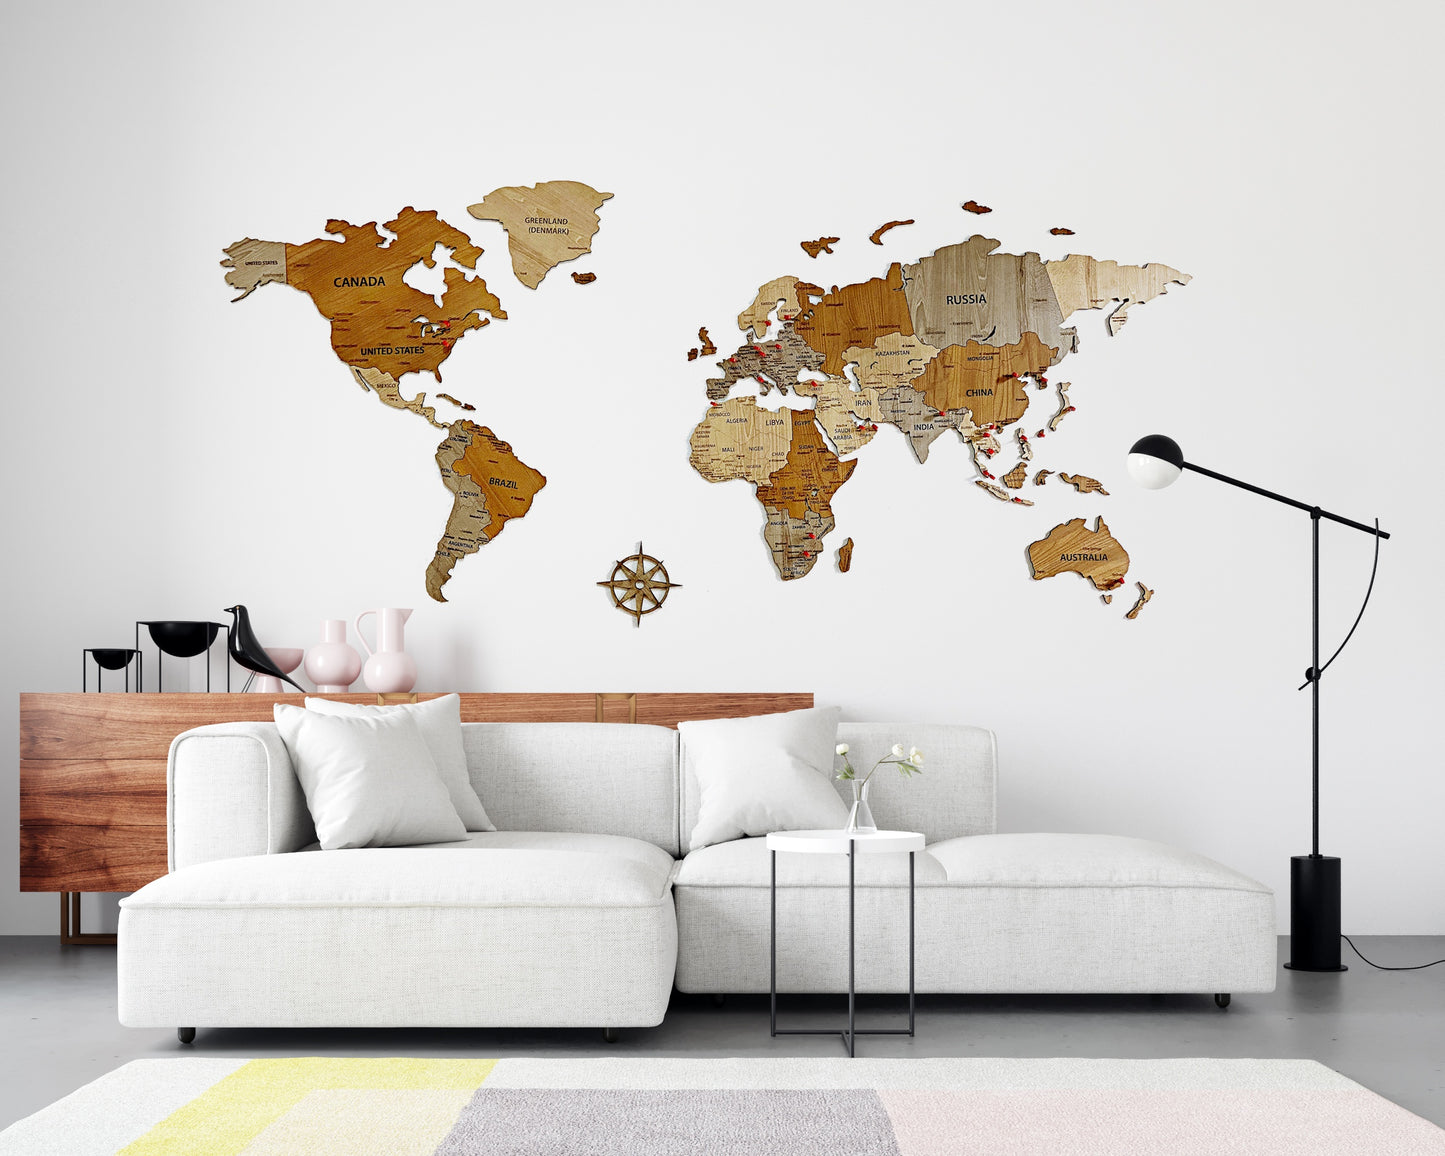 World map wooden map wall decor, wooden home decoration, wall art map, livingroom, kitchen, bedroom rustic decor - 01